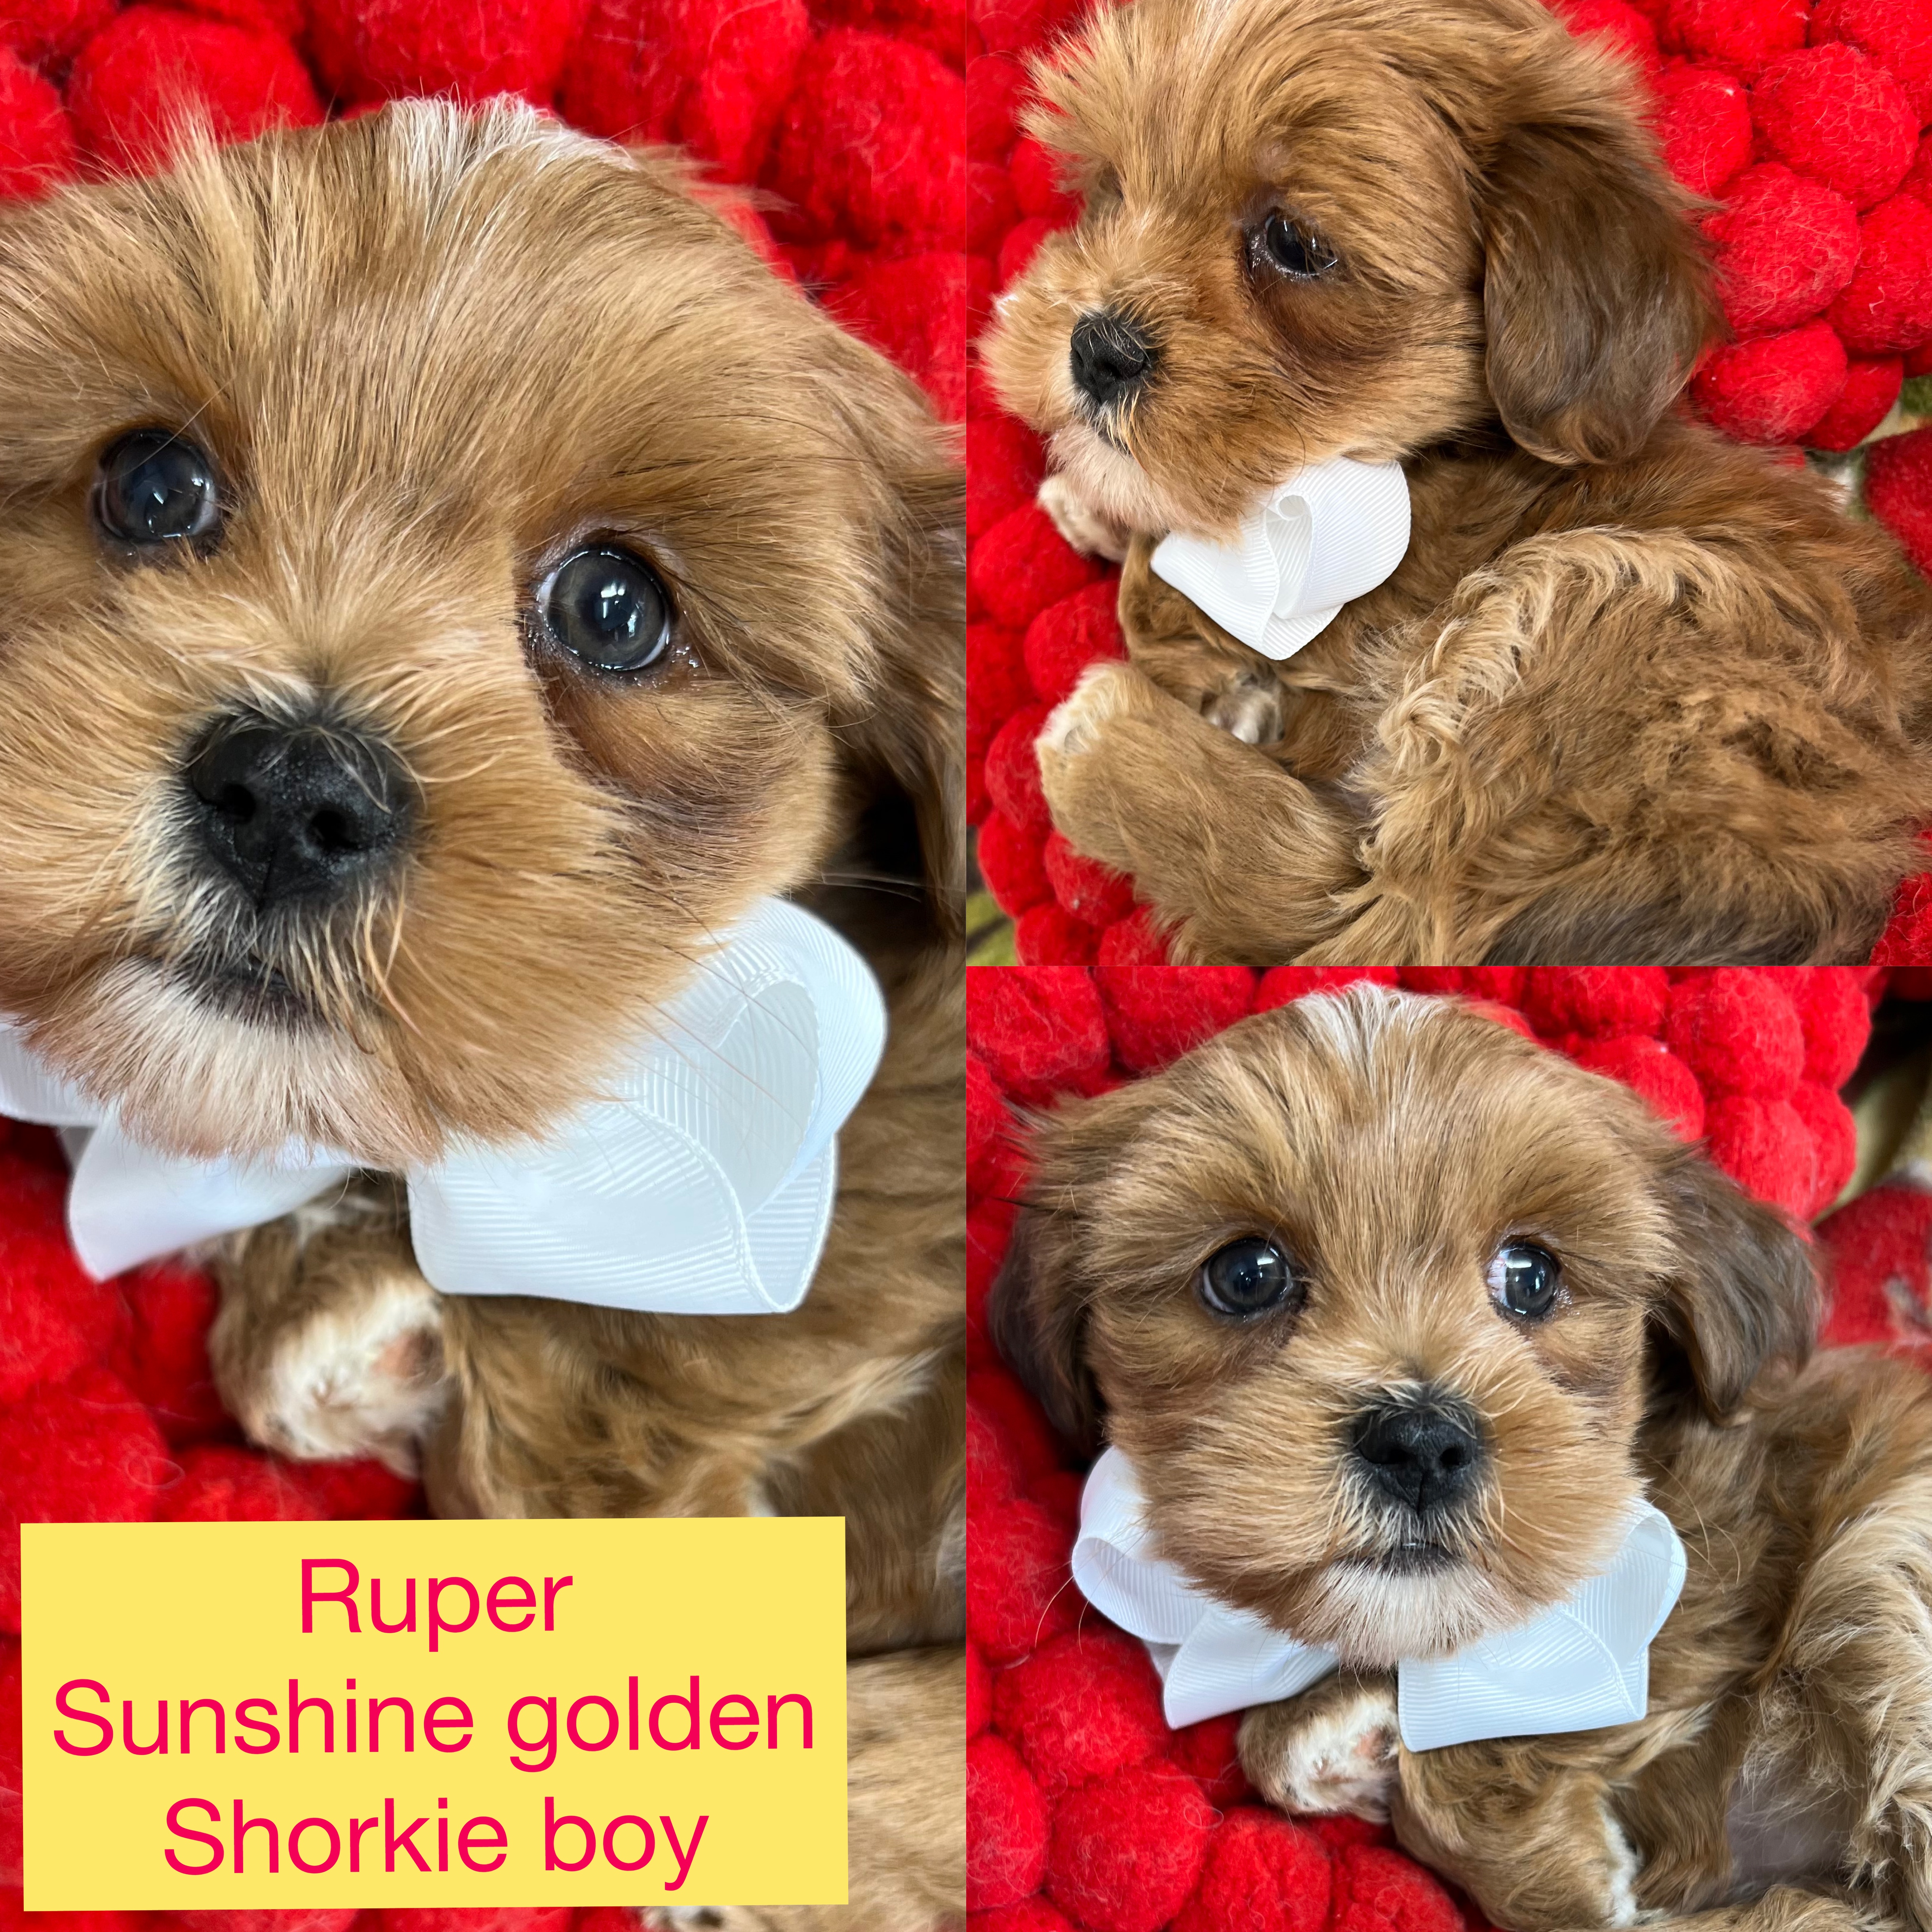 Ruper is ADOPTED